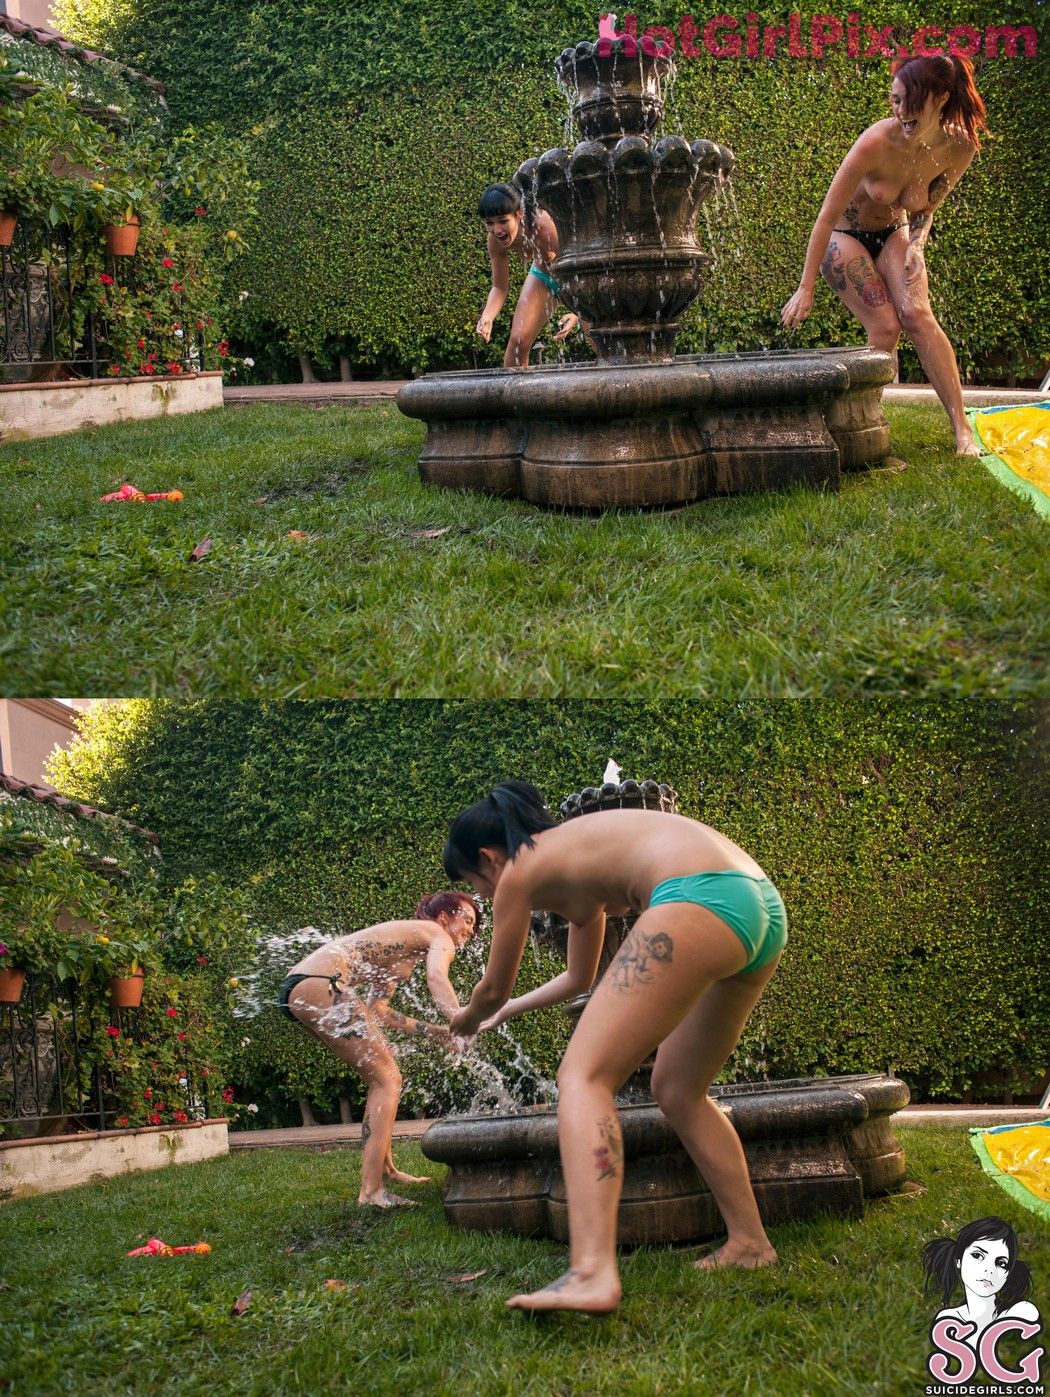 [Suicide Girls] Chad - Water Games